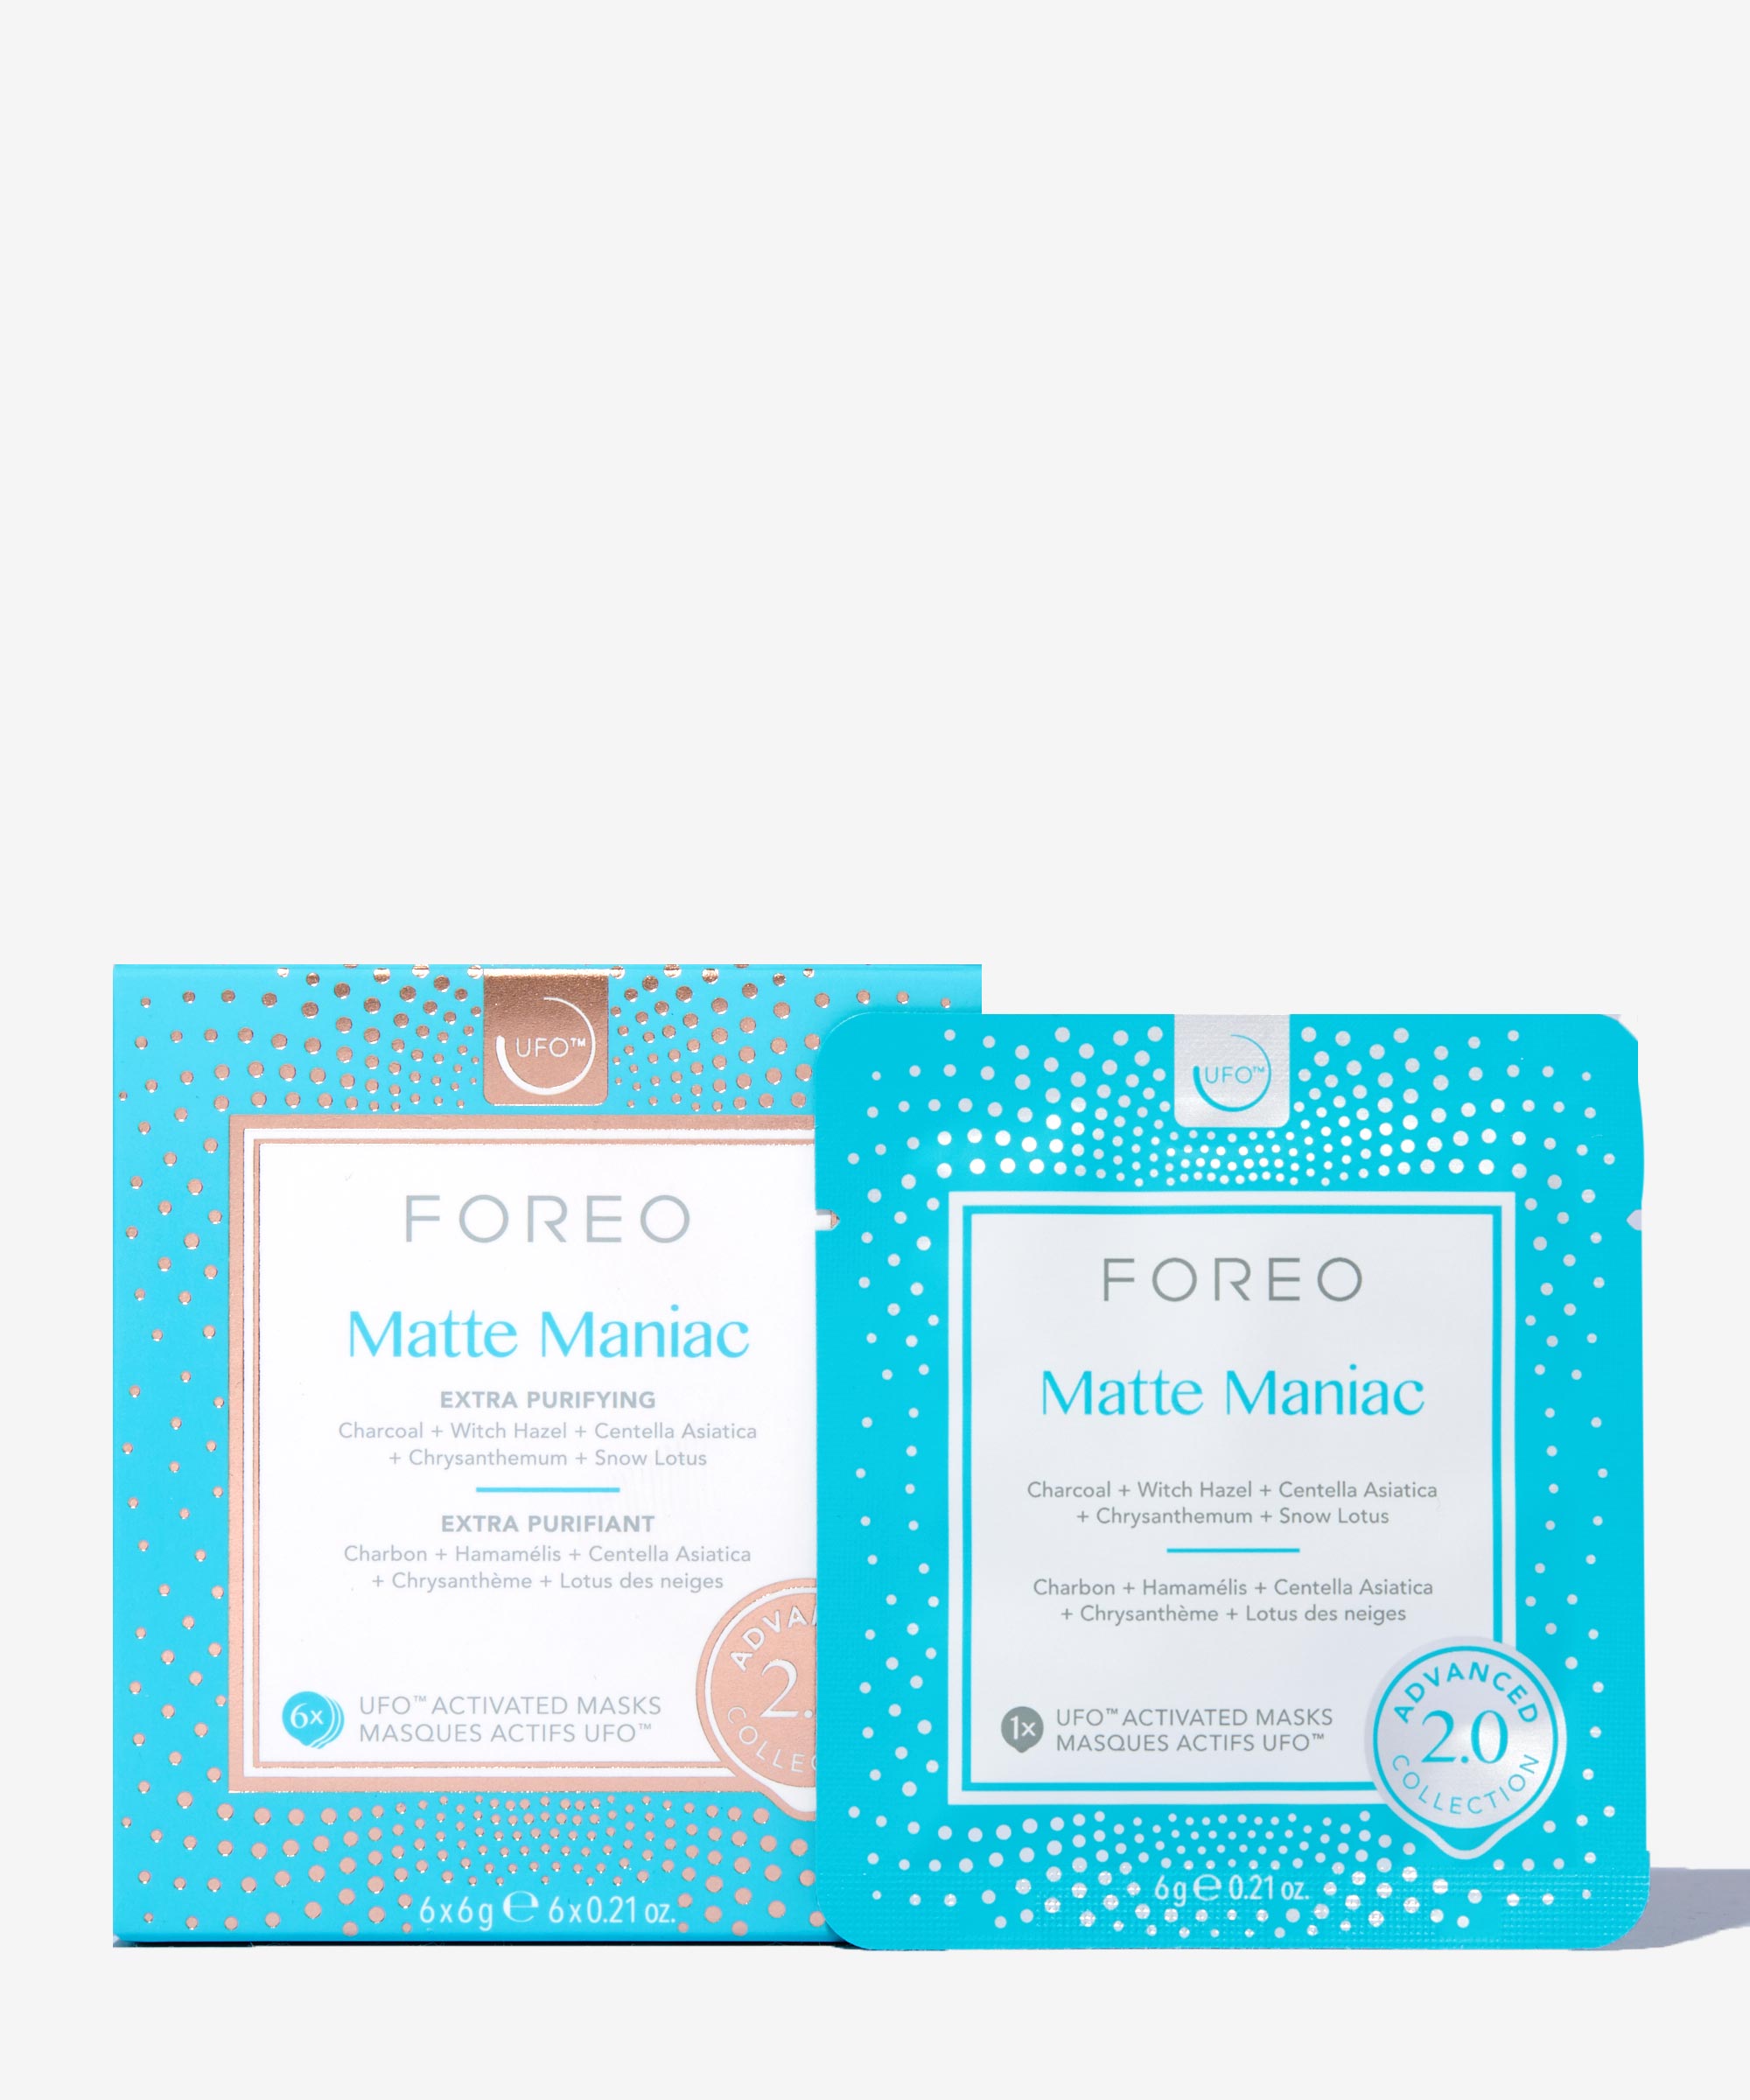 Foreo Matte Purifying 2.0 Maniac BEAUTY BAY Mask at UFO-Activated